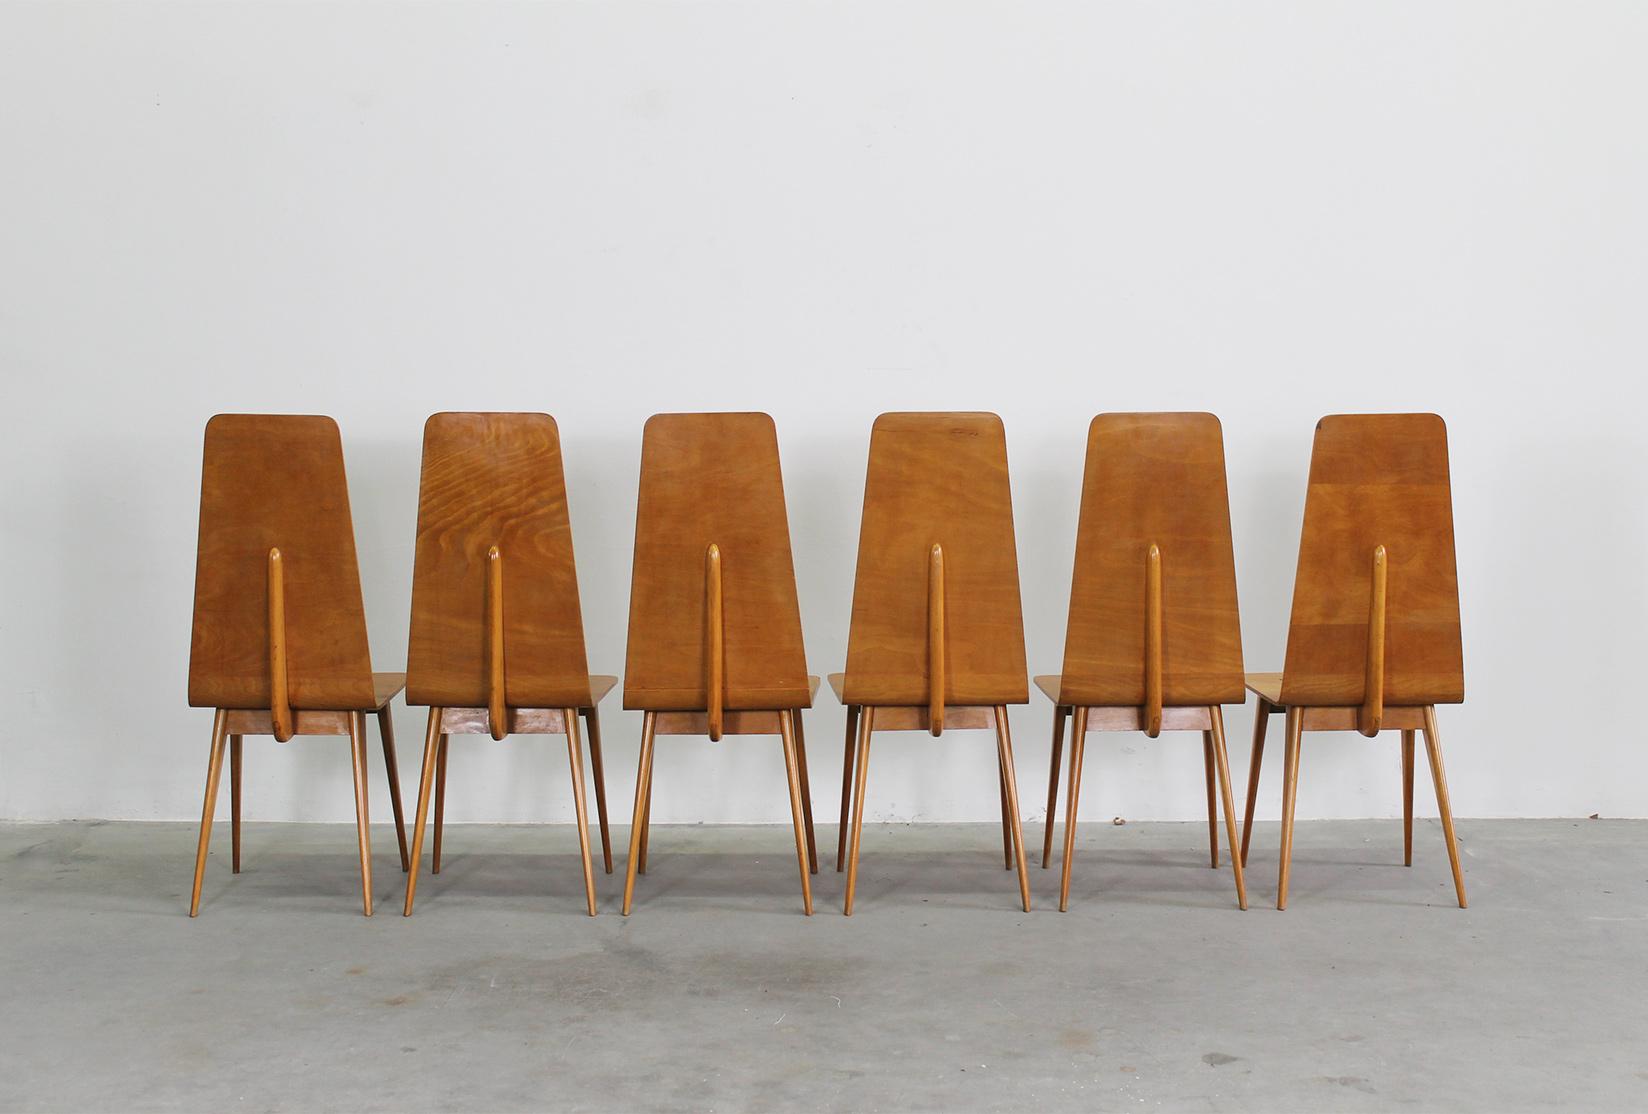 Mid-20th Century Set of Six Dining Chairs in Wood by Sineo Gemignani Italian Manufacture 1940s For Sale